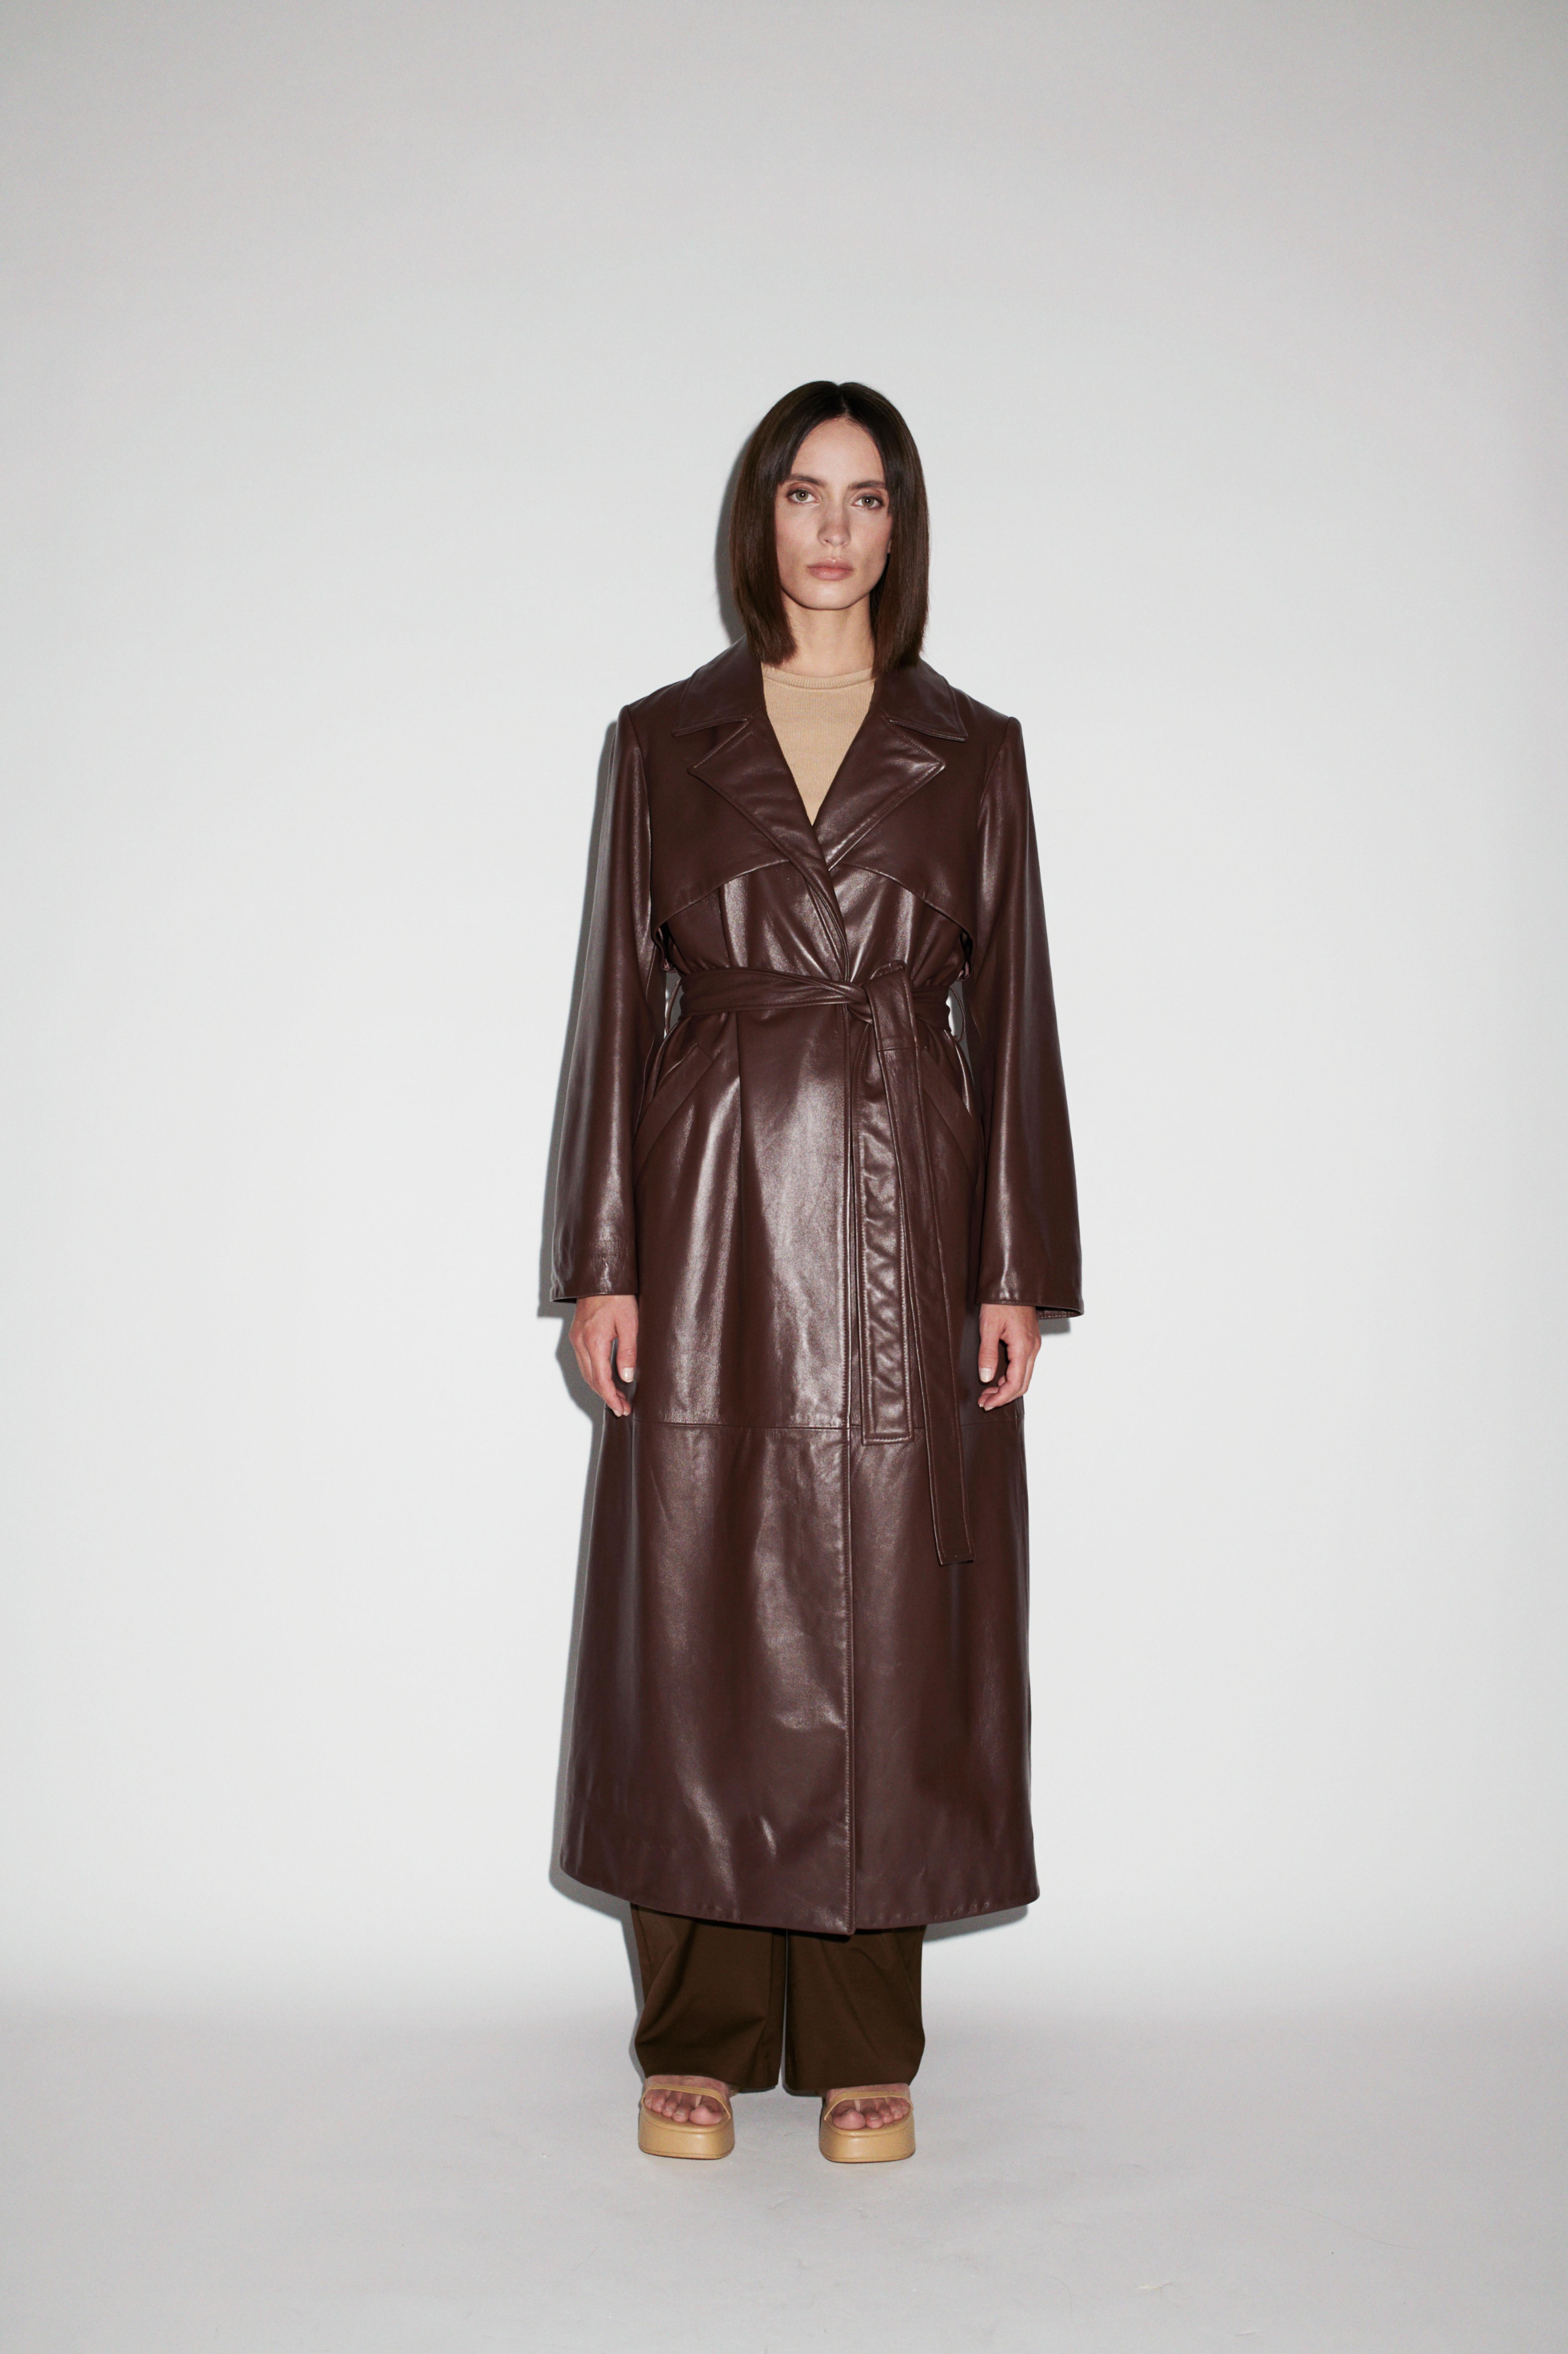 Verheyen London Leather Trench Coat in Chocolate Brown - Size uk 8

Handmade in London, made with 100% Italian Lambs Leather this luxury item is an investment piece to wear for a lifetime.  This piece is made by artisans in London, expert artisans